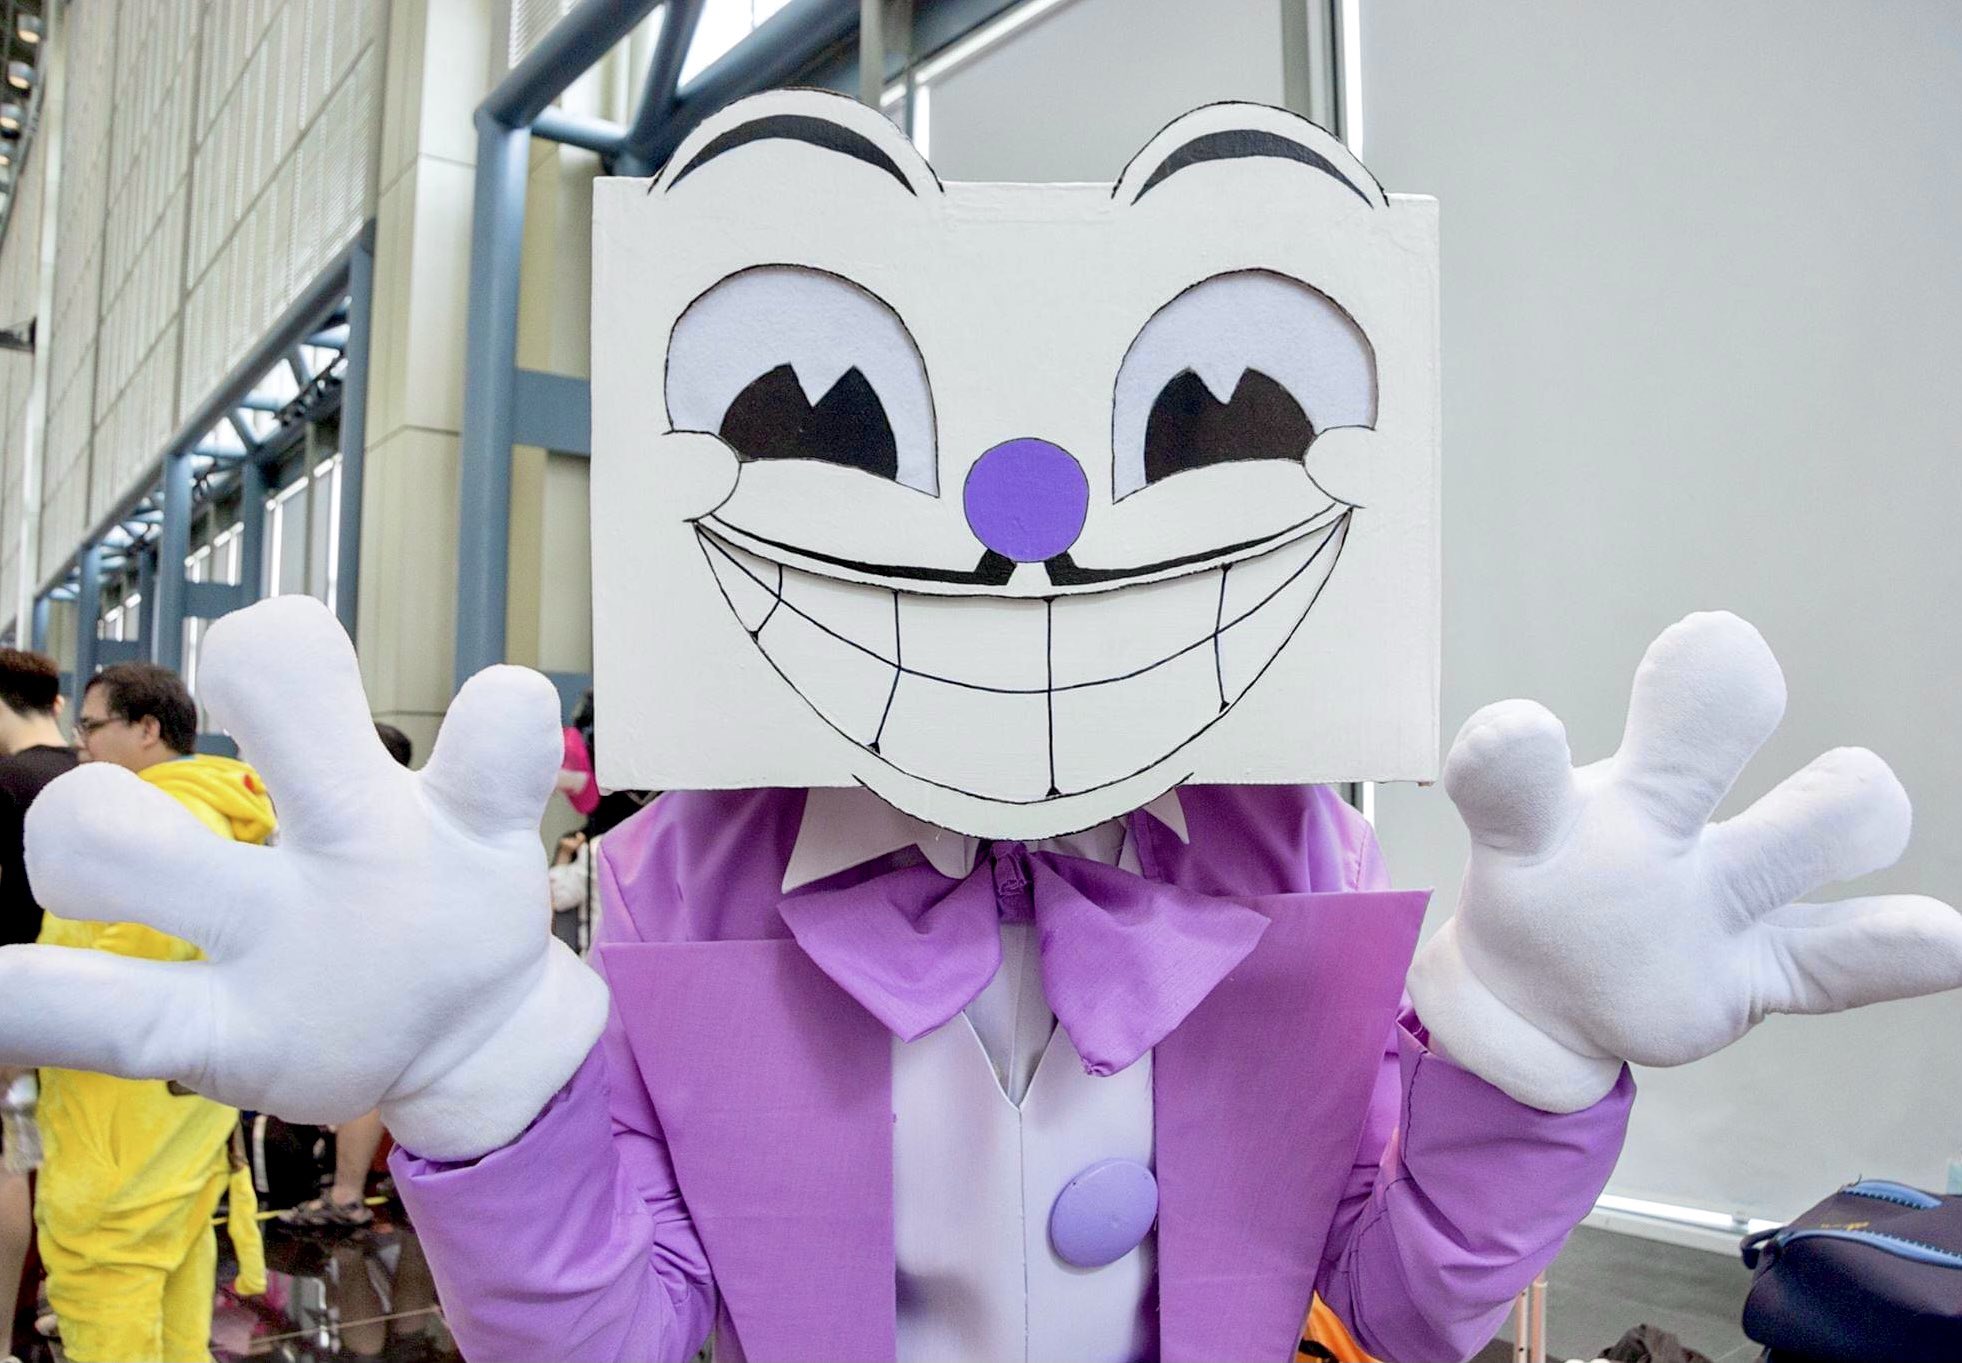 K👁ma on X: Throwback to 2017 👀👀👀 (oh boy it's been 5 years) when I  cosplayed King Dice and Devil with @_MikuChii as Mugman and King Dice💙💜 I  miss going to cons